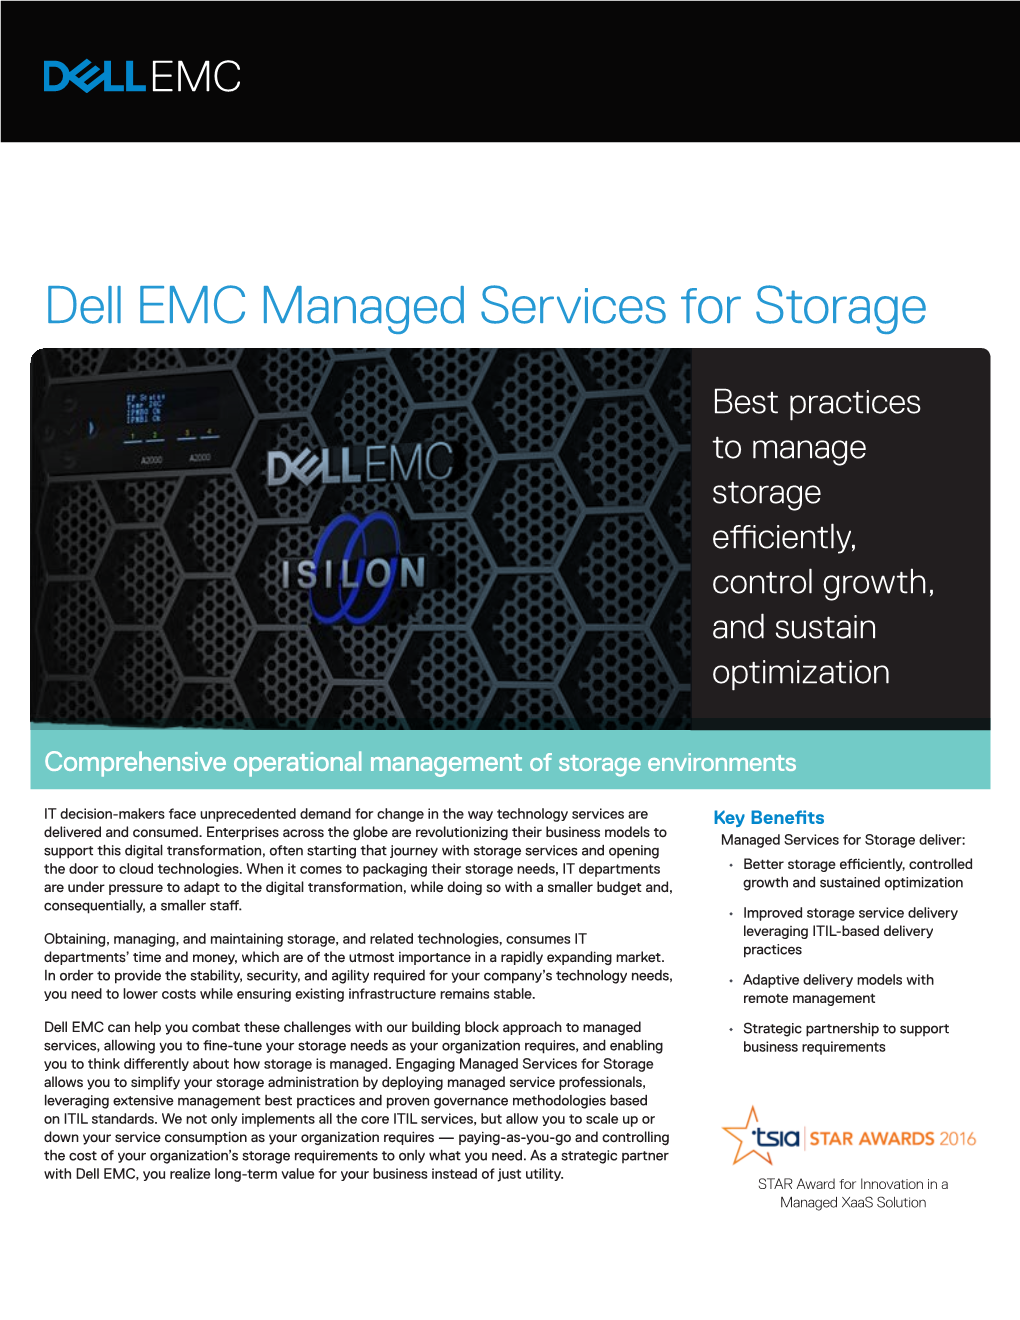 Managed Services for Storage